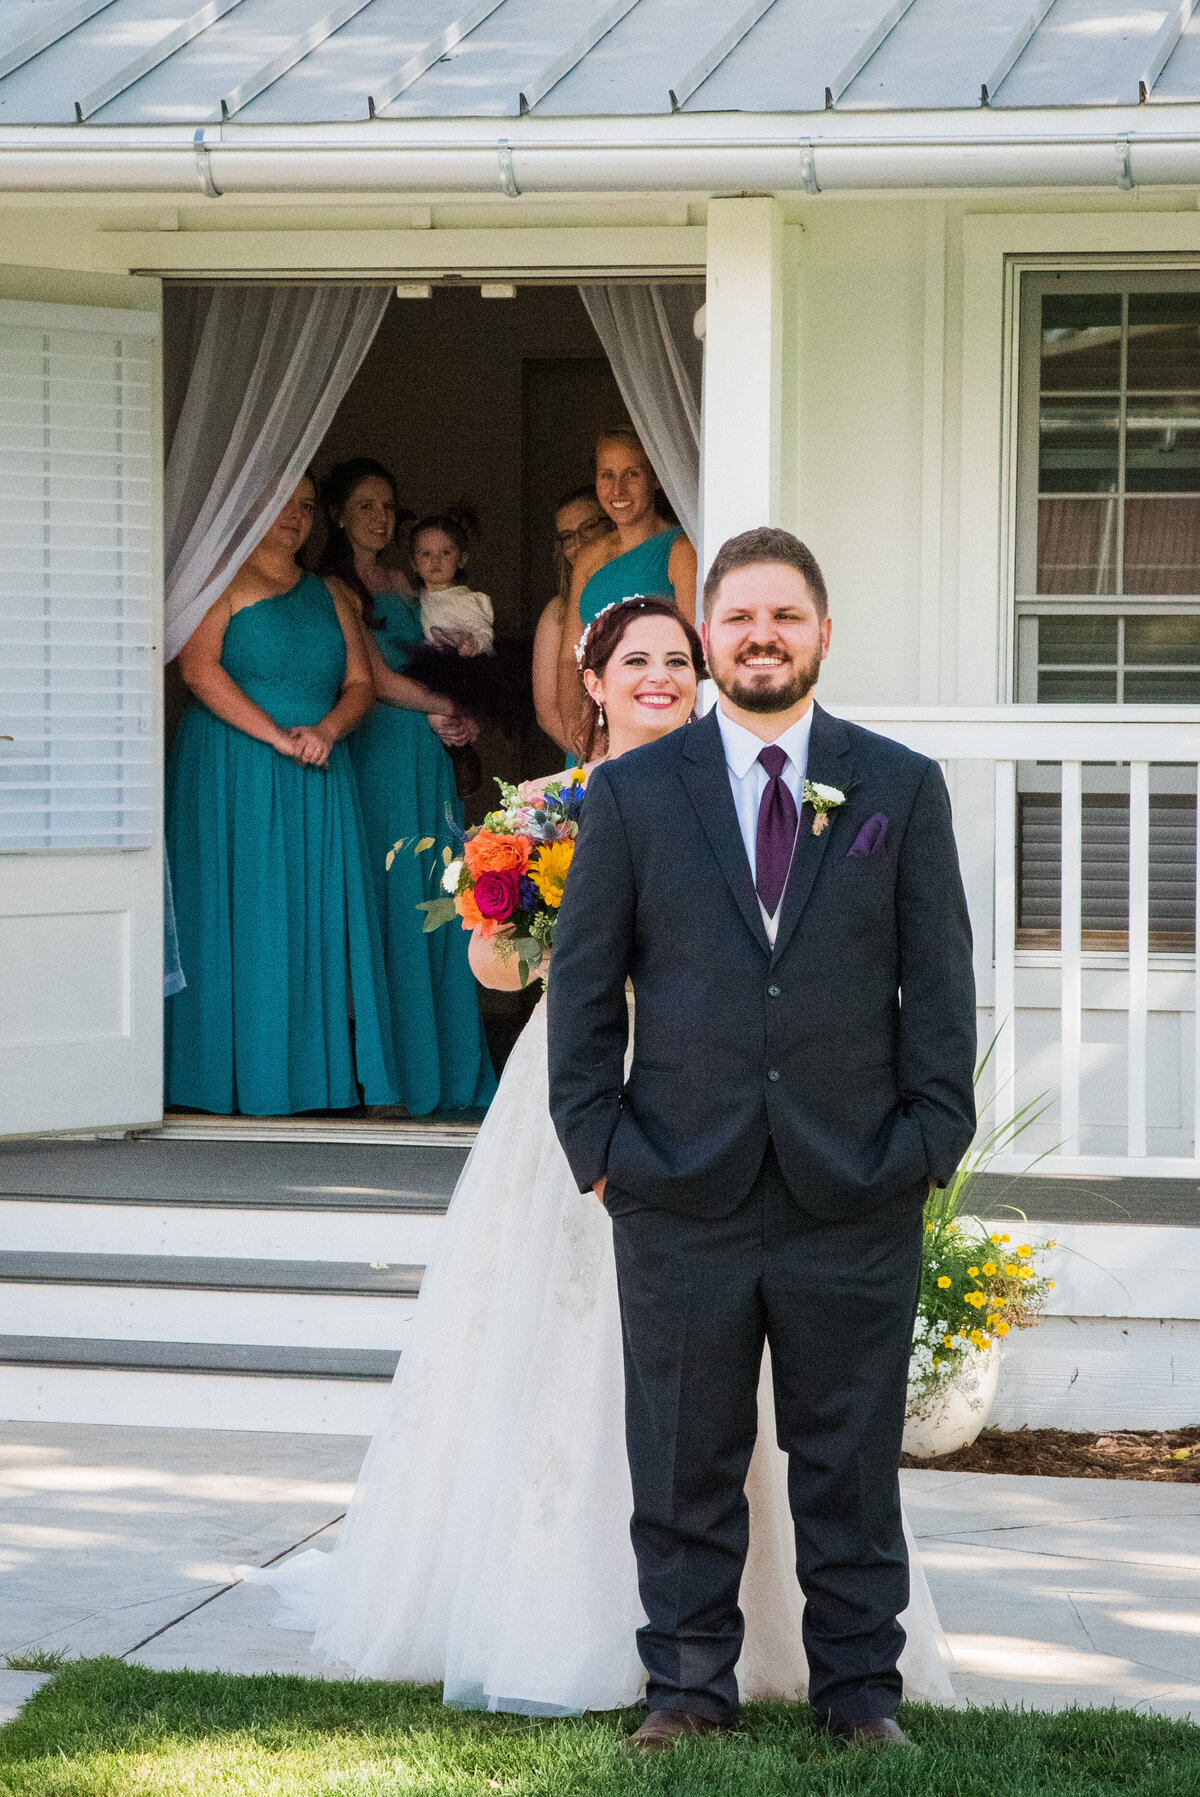 A bride approaches her groom for their first look at The Barn at Raccoon Creek as the bridesmaids watch in the background.